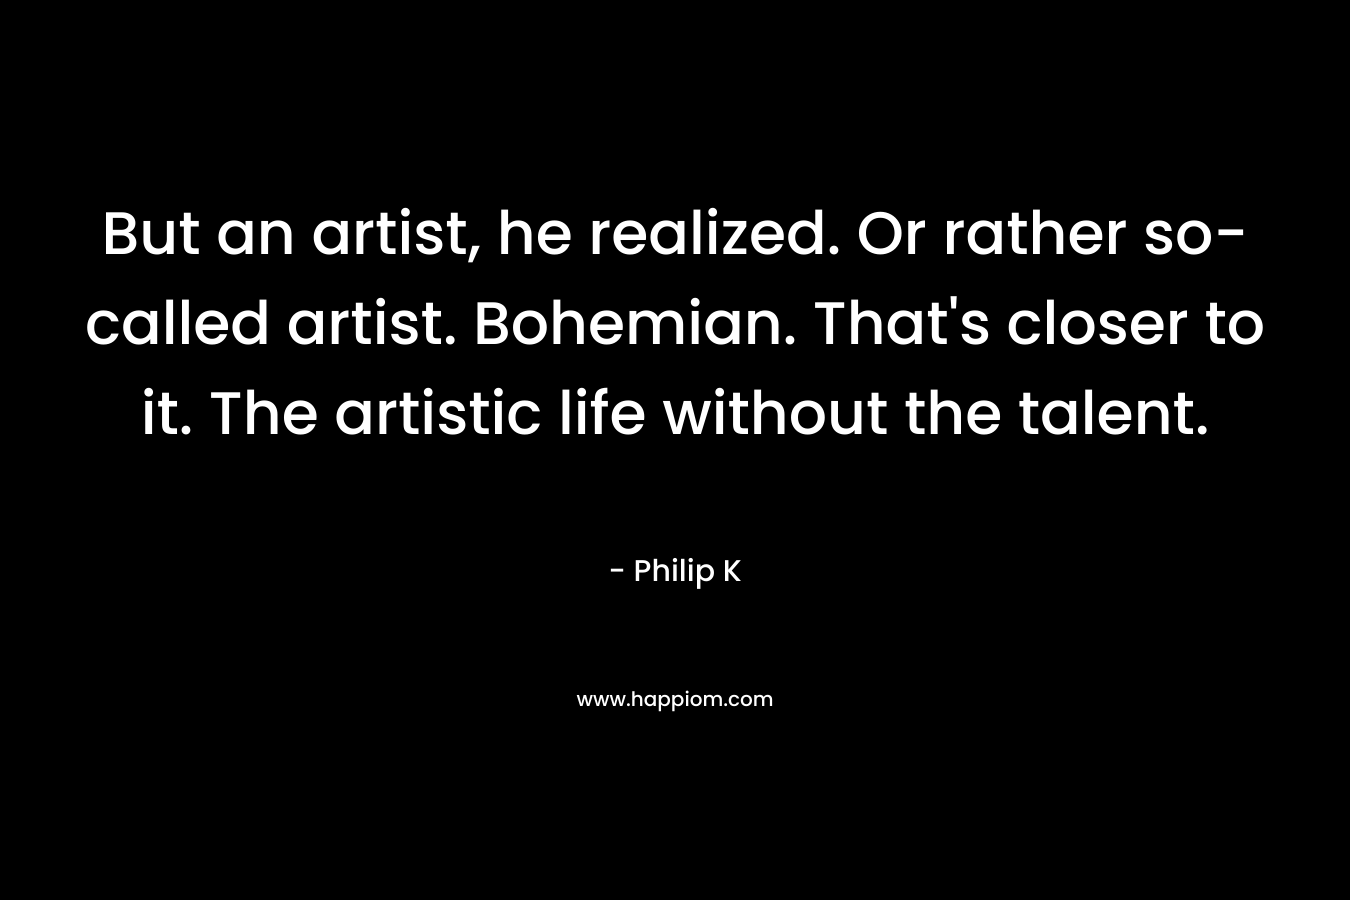 But an artist, he realized. Or rather so-called artist. Bohemian. That's closer to it. The artistic life without the talent.